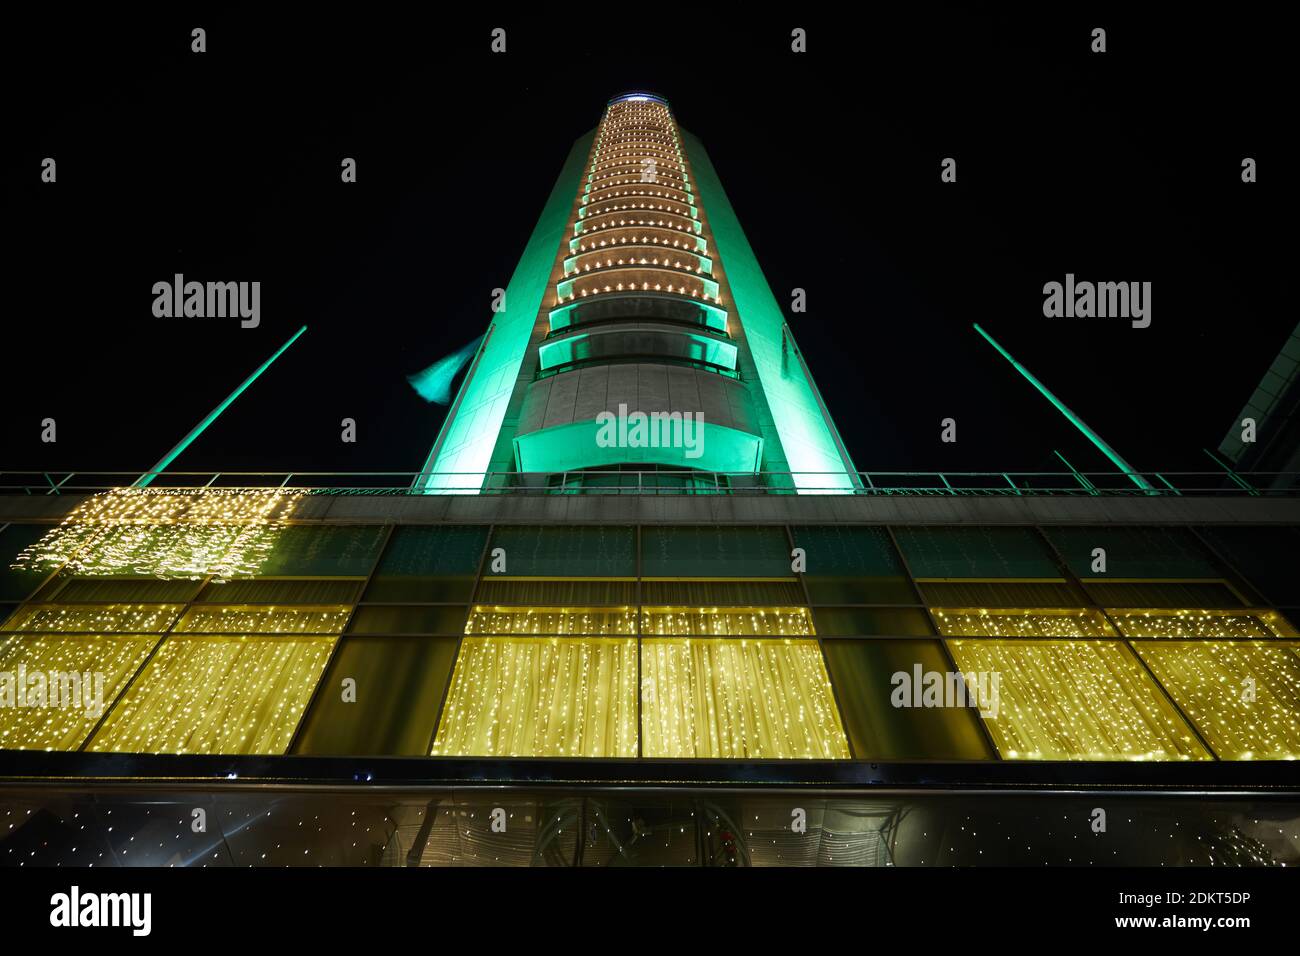 London, UK. - 15 Dec 2020: The front of the Hilton hotel on Park Lane, decorated for the Christmas 2020 festive season. Stock Photo